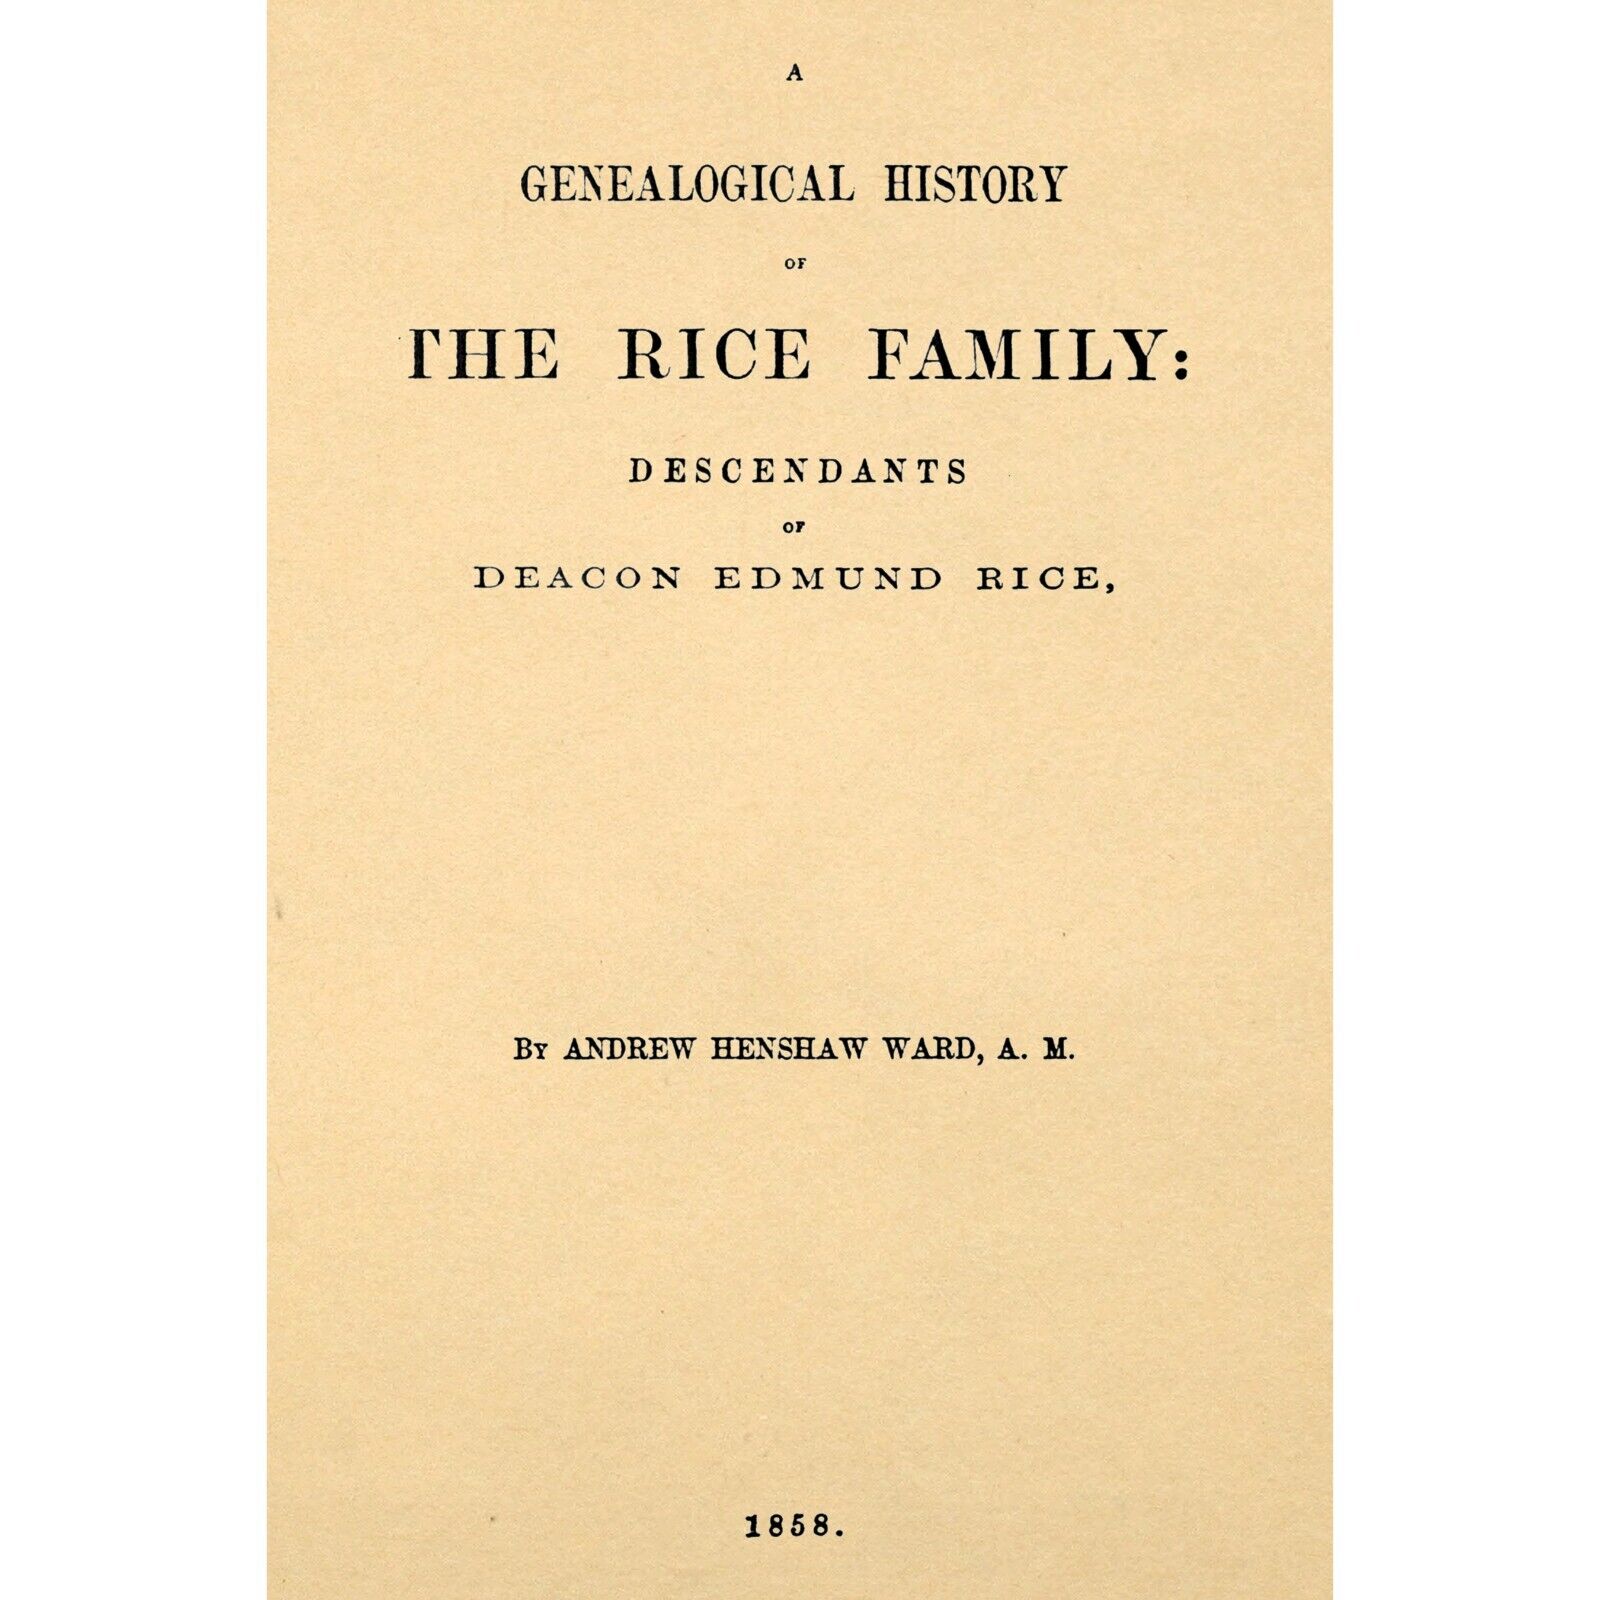 A Genealogical History of the Rice Family: